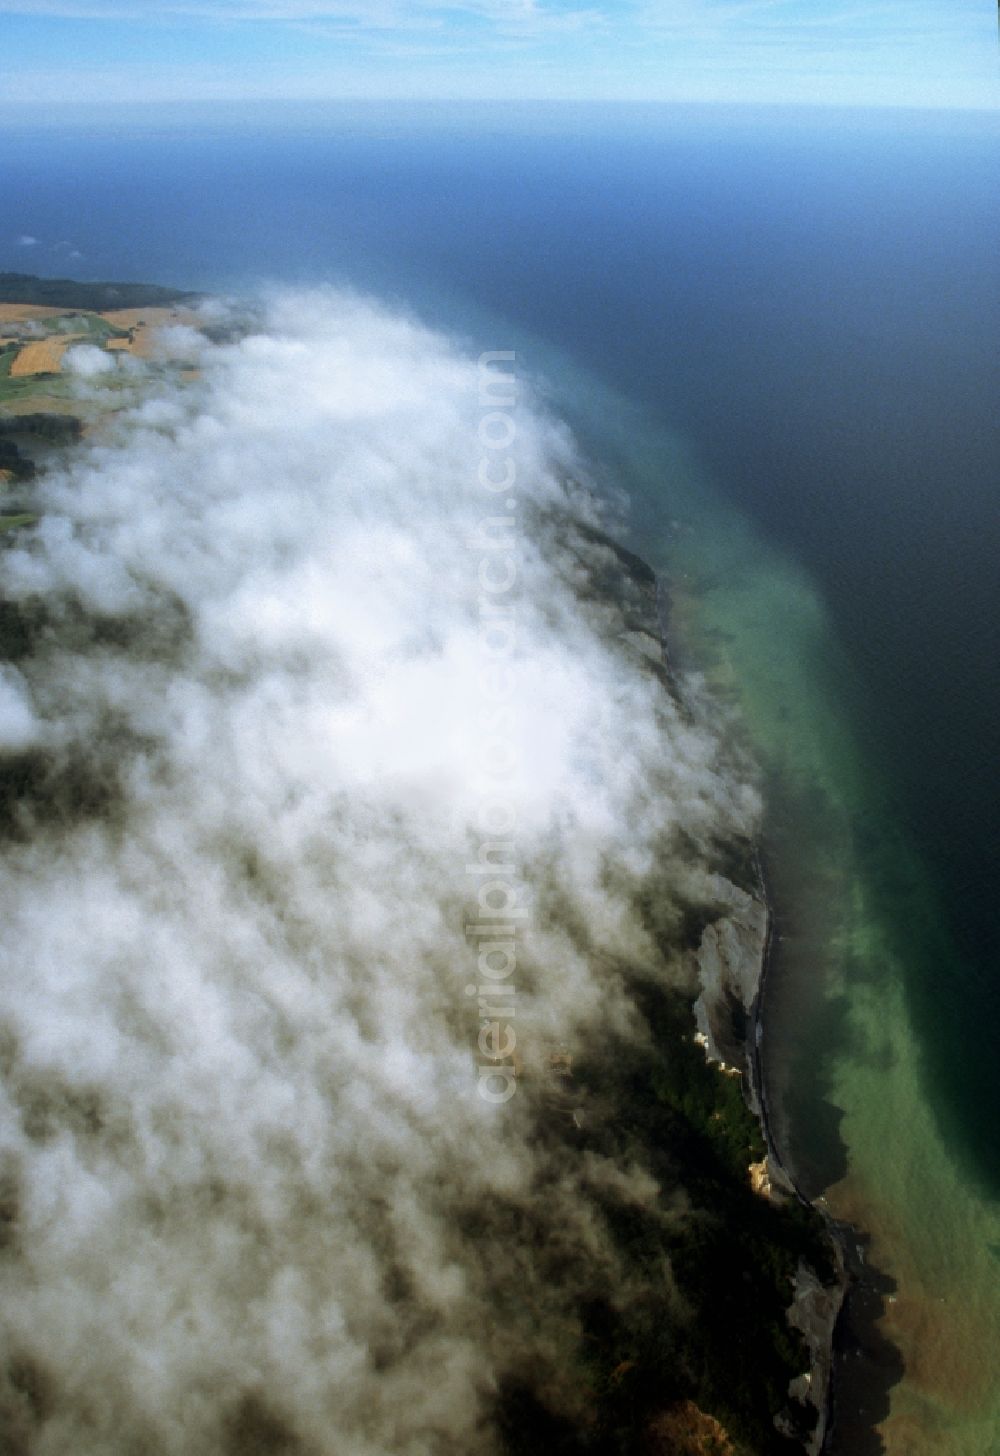 Aerial image Borre - Chalk cliffs of Møns Klint in Borre on the island Moen in Denmark. The clouds over the forest are considered rare natural spectacle that so occurs only in the boundary between land and water